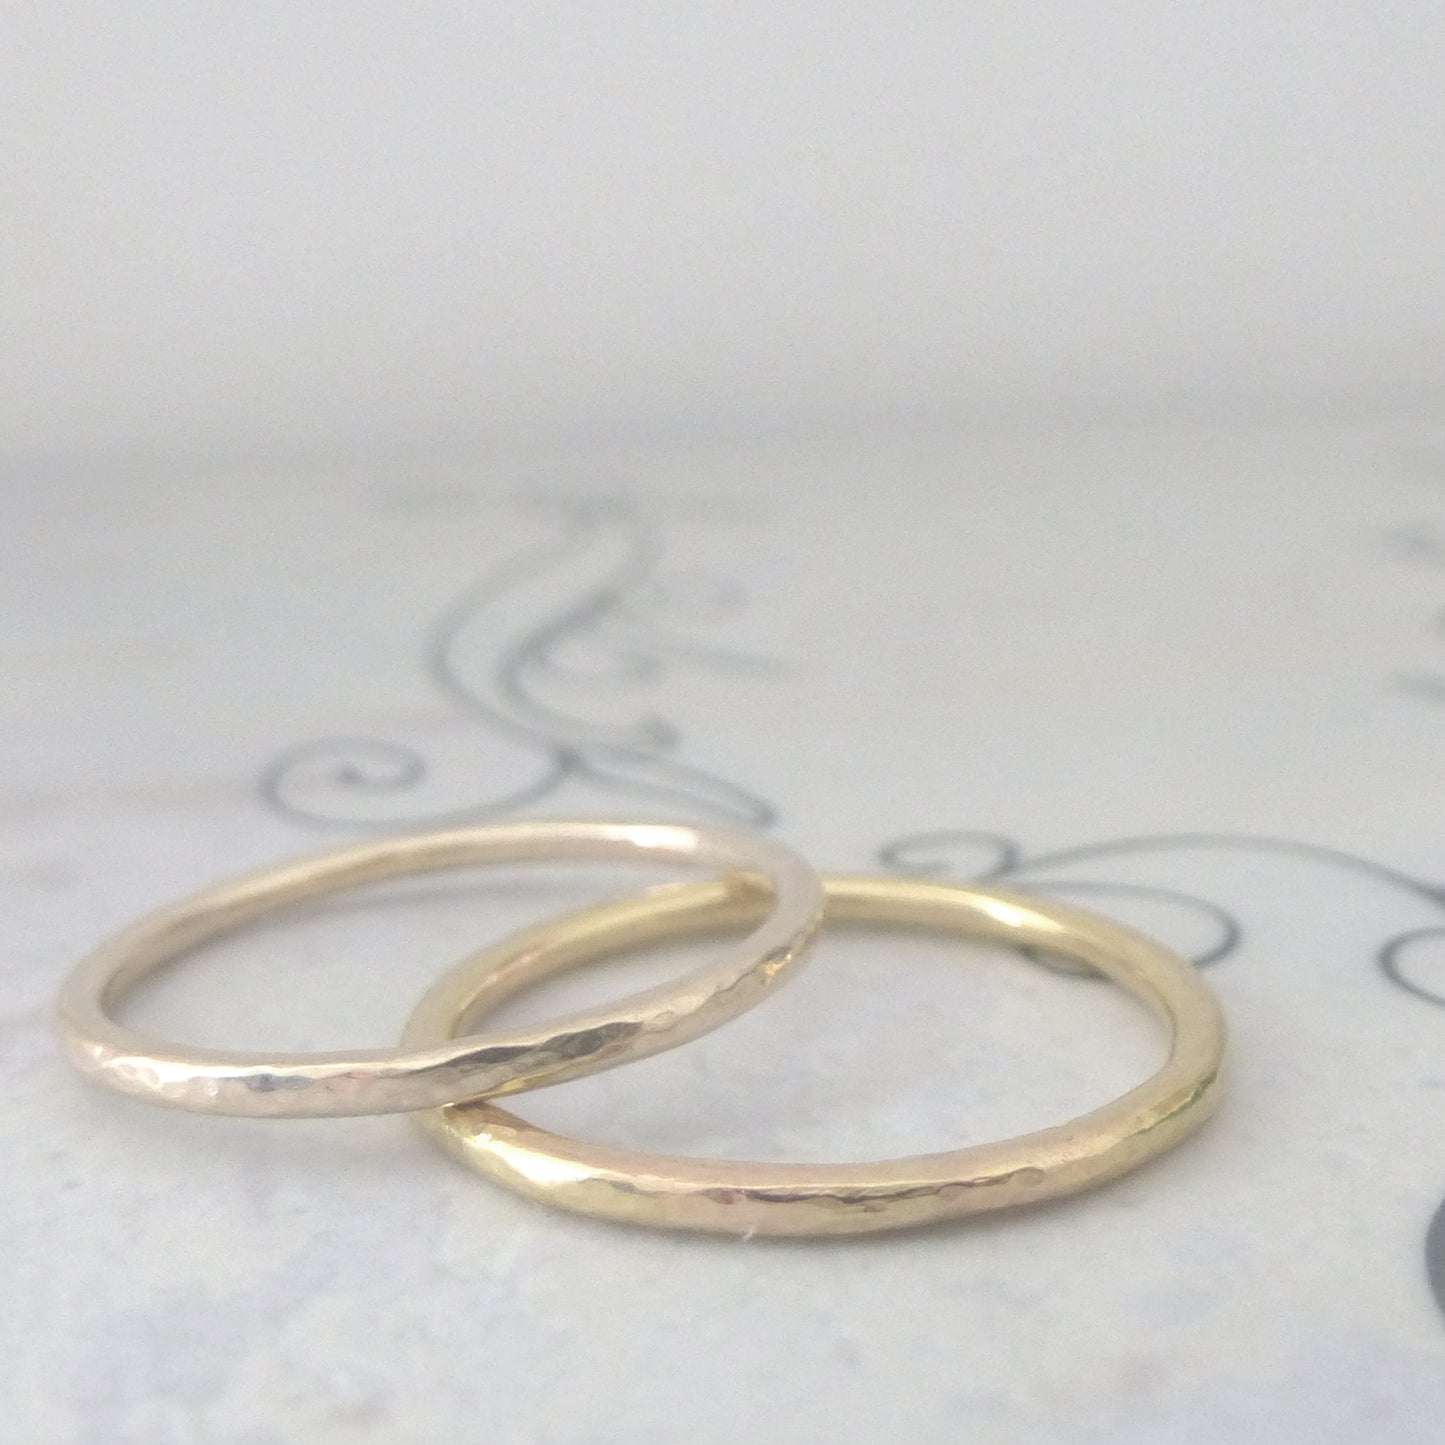 Elegant Band Ring in 9ct Gold - 1.5mm - yellow - Hammered or Smooth